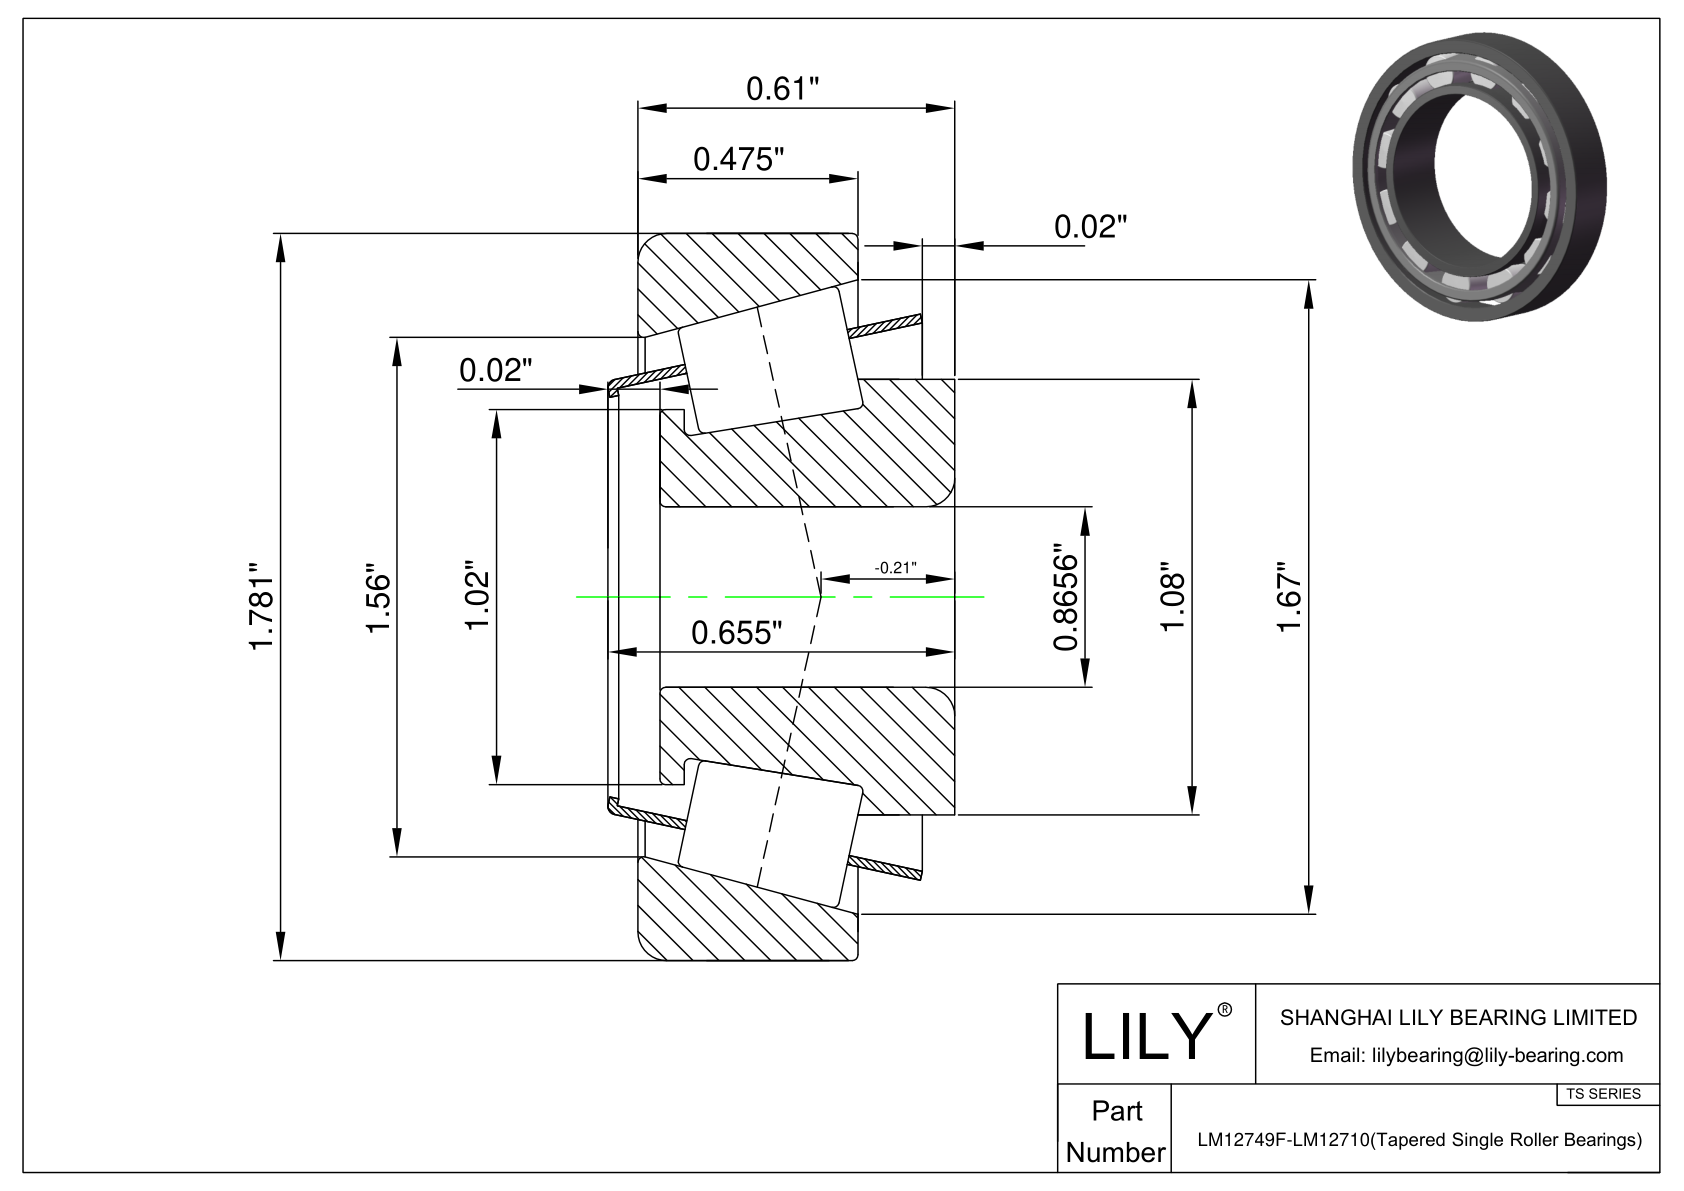 LM12749F-LM12710 TS (Tapered Single Roller Bearings) (Imperial) cad drawing